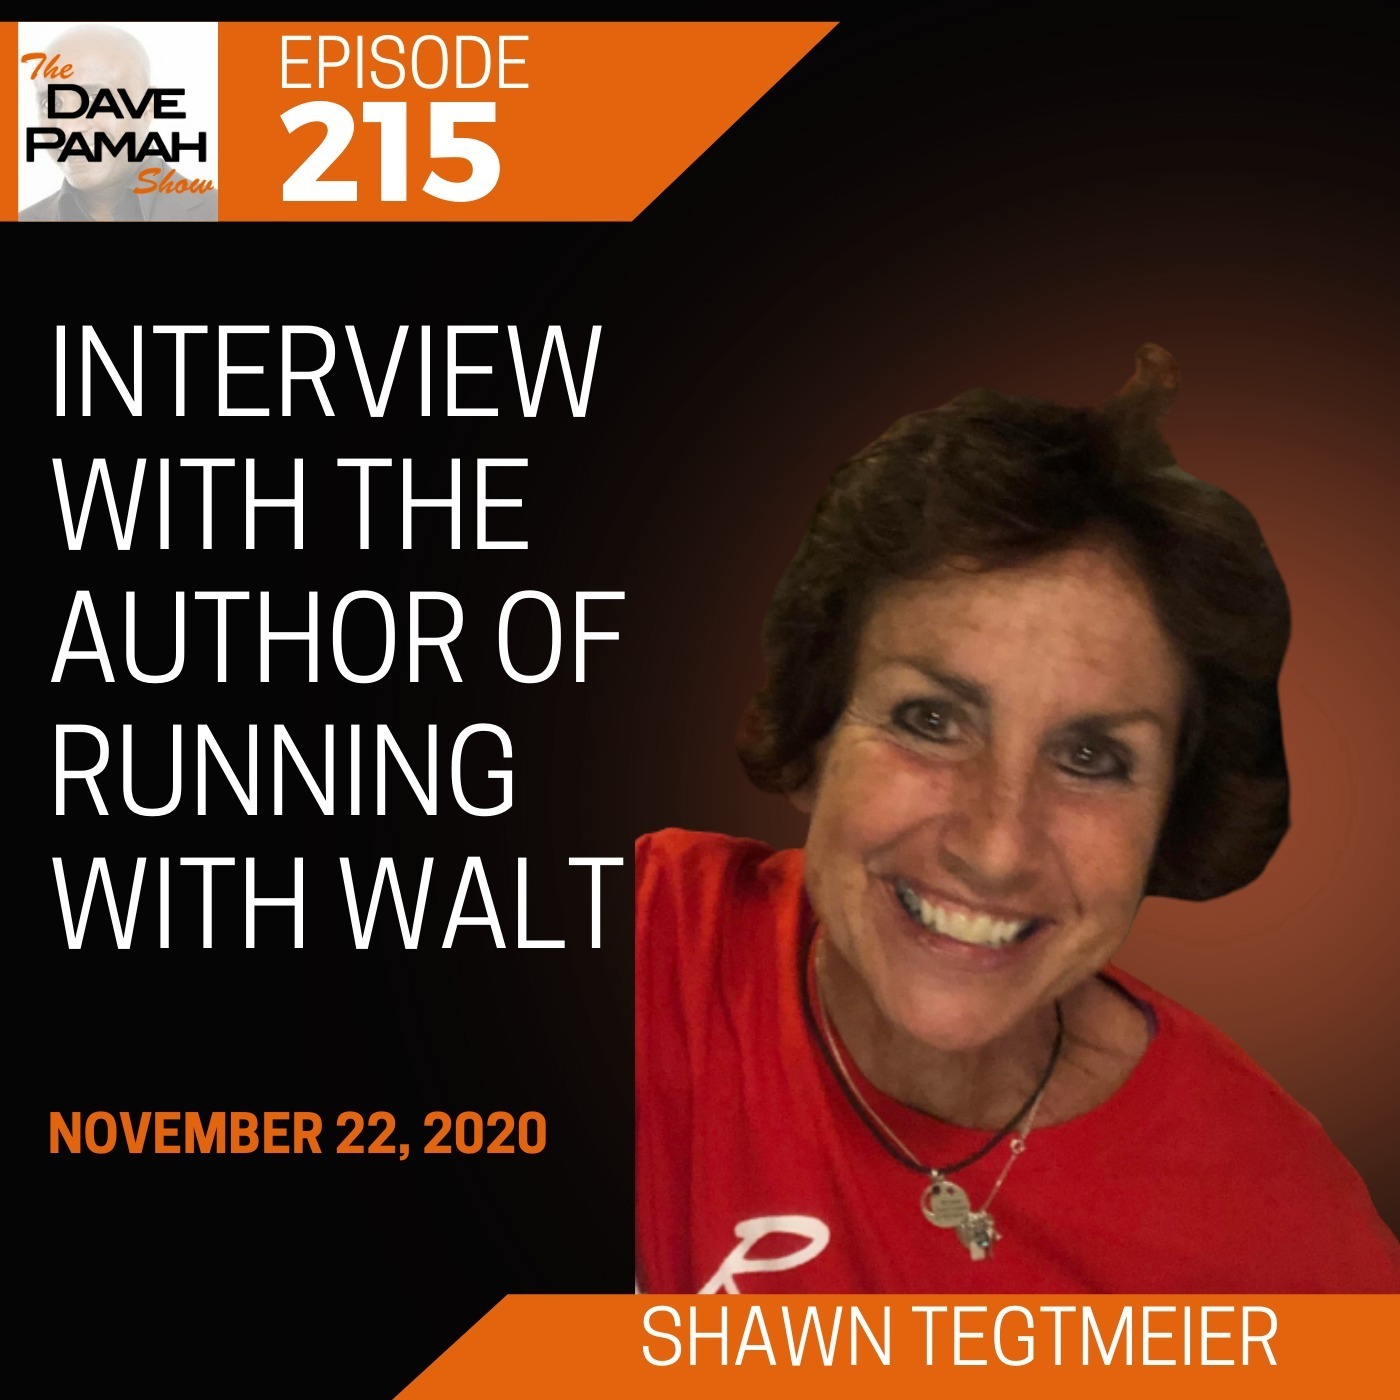 Interview with the author of Running With Walt - Shawn Tegtmeier